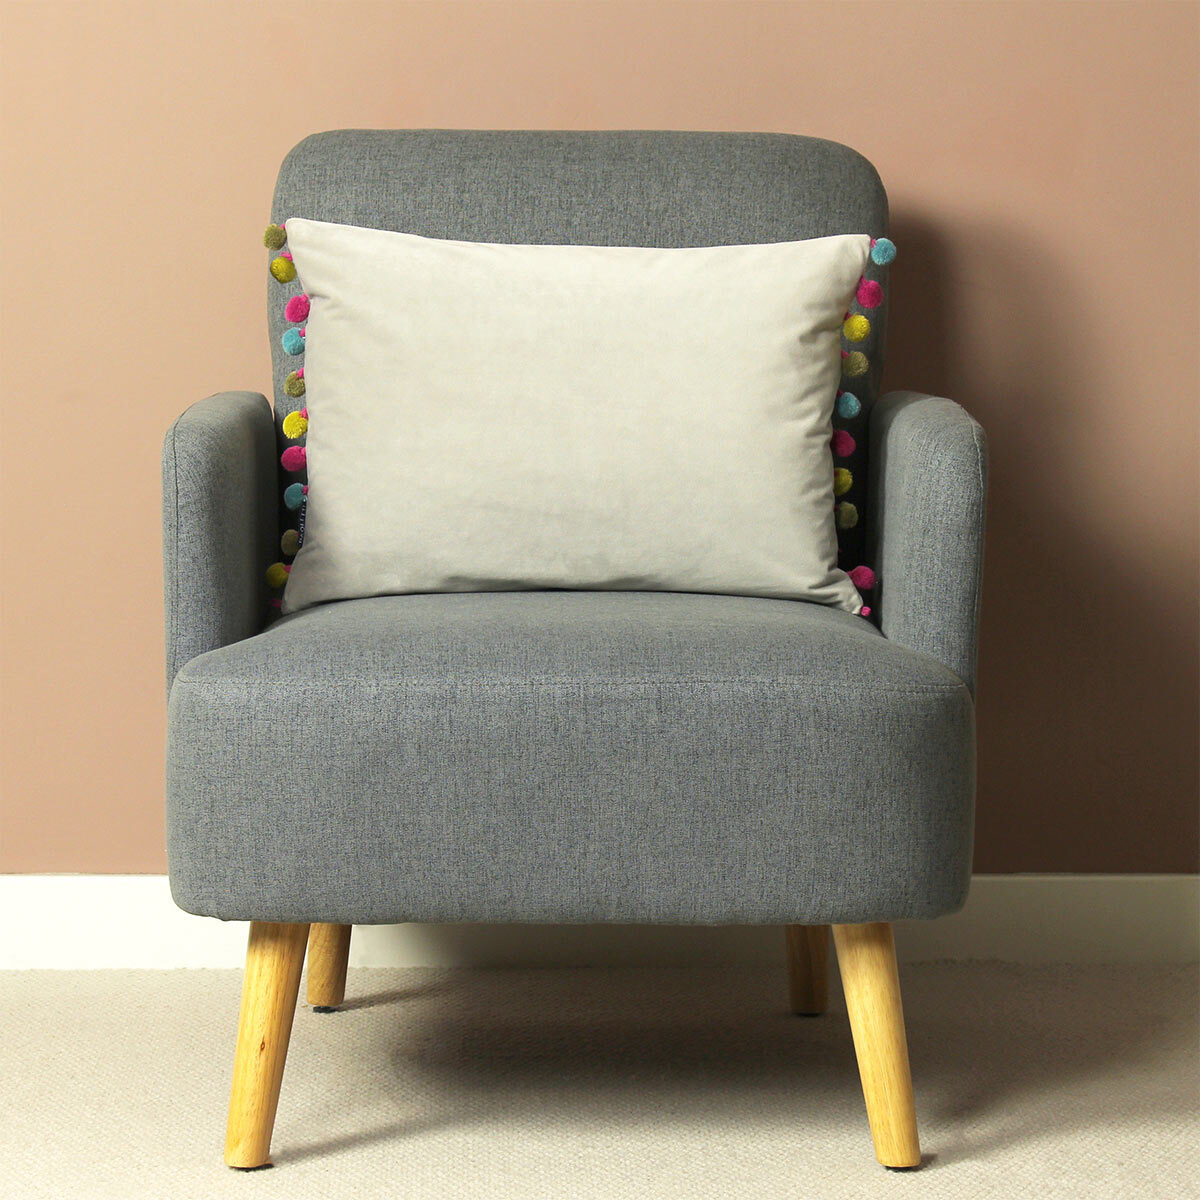 Lifestyle Image of Carnival Velvet Bolster Cushion on Accent Chair